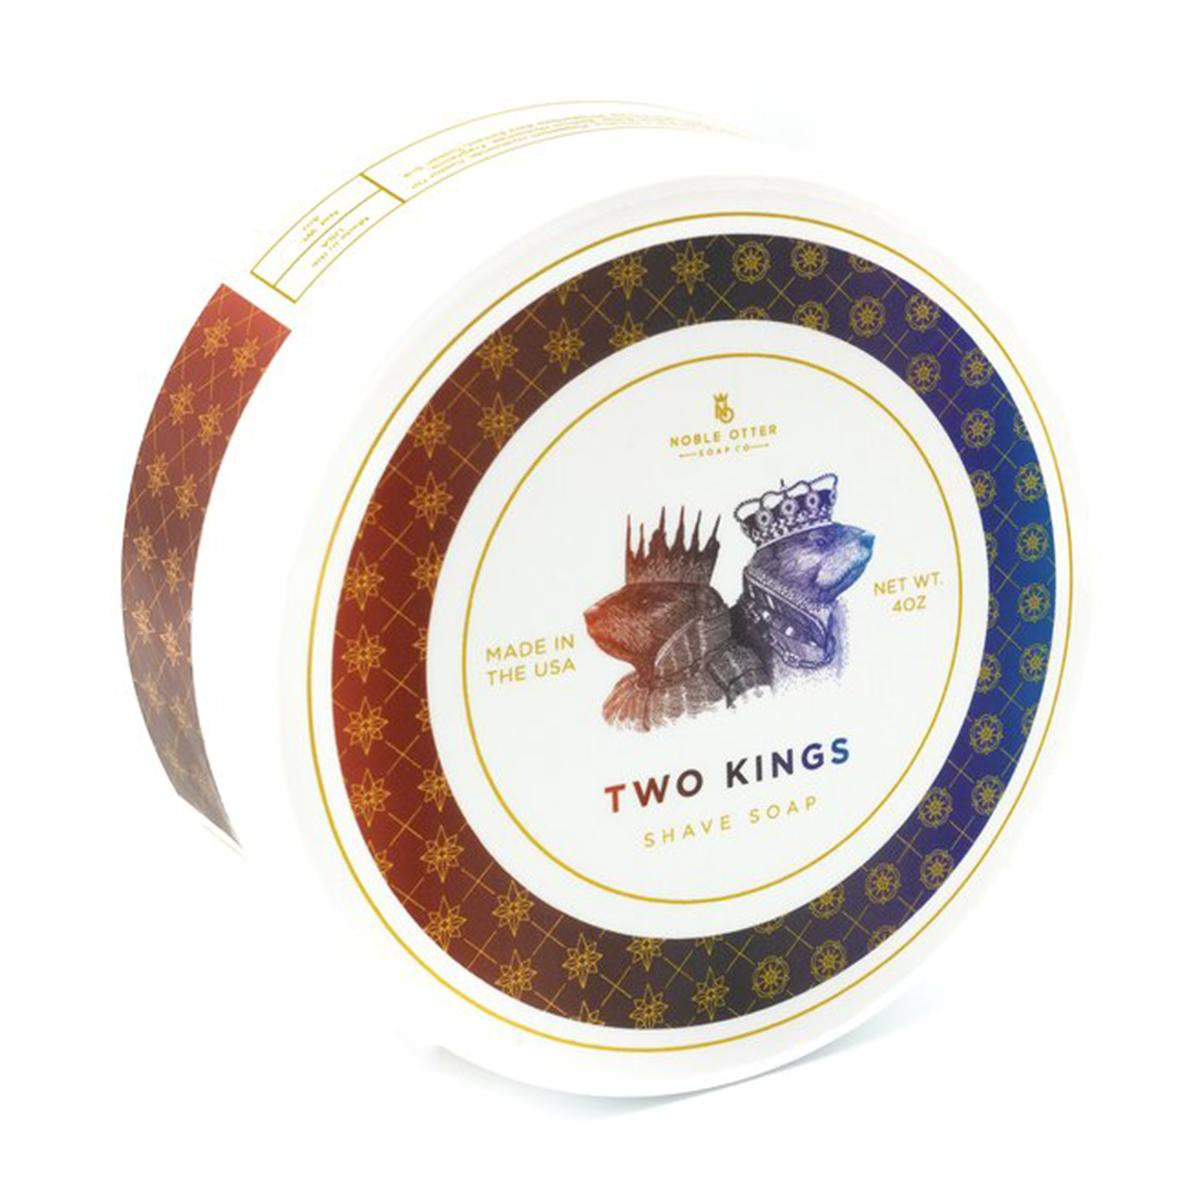 Primary image of Two Kings Shaving Soap 